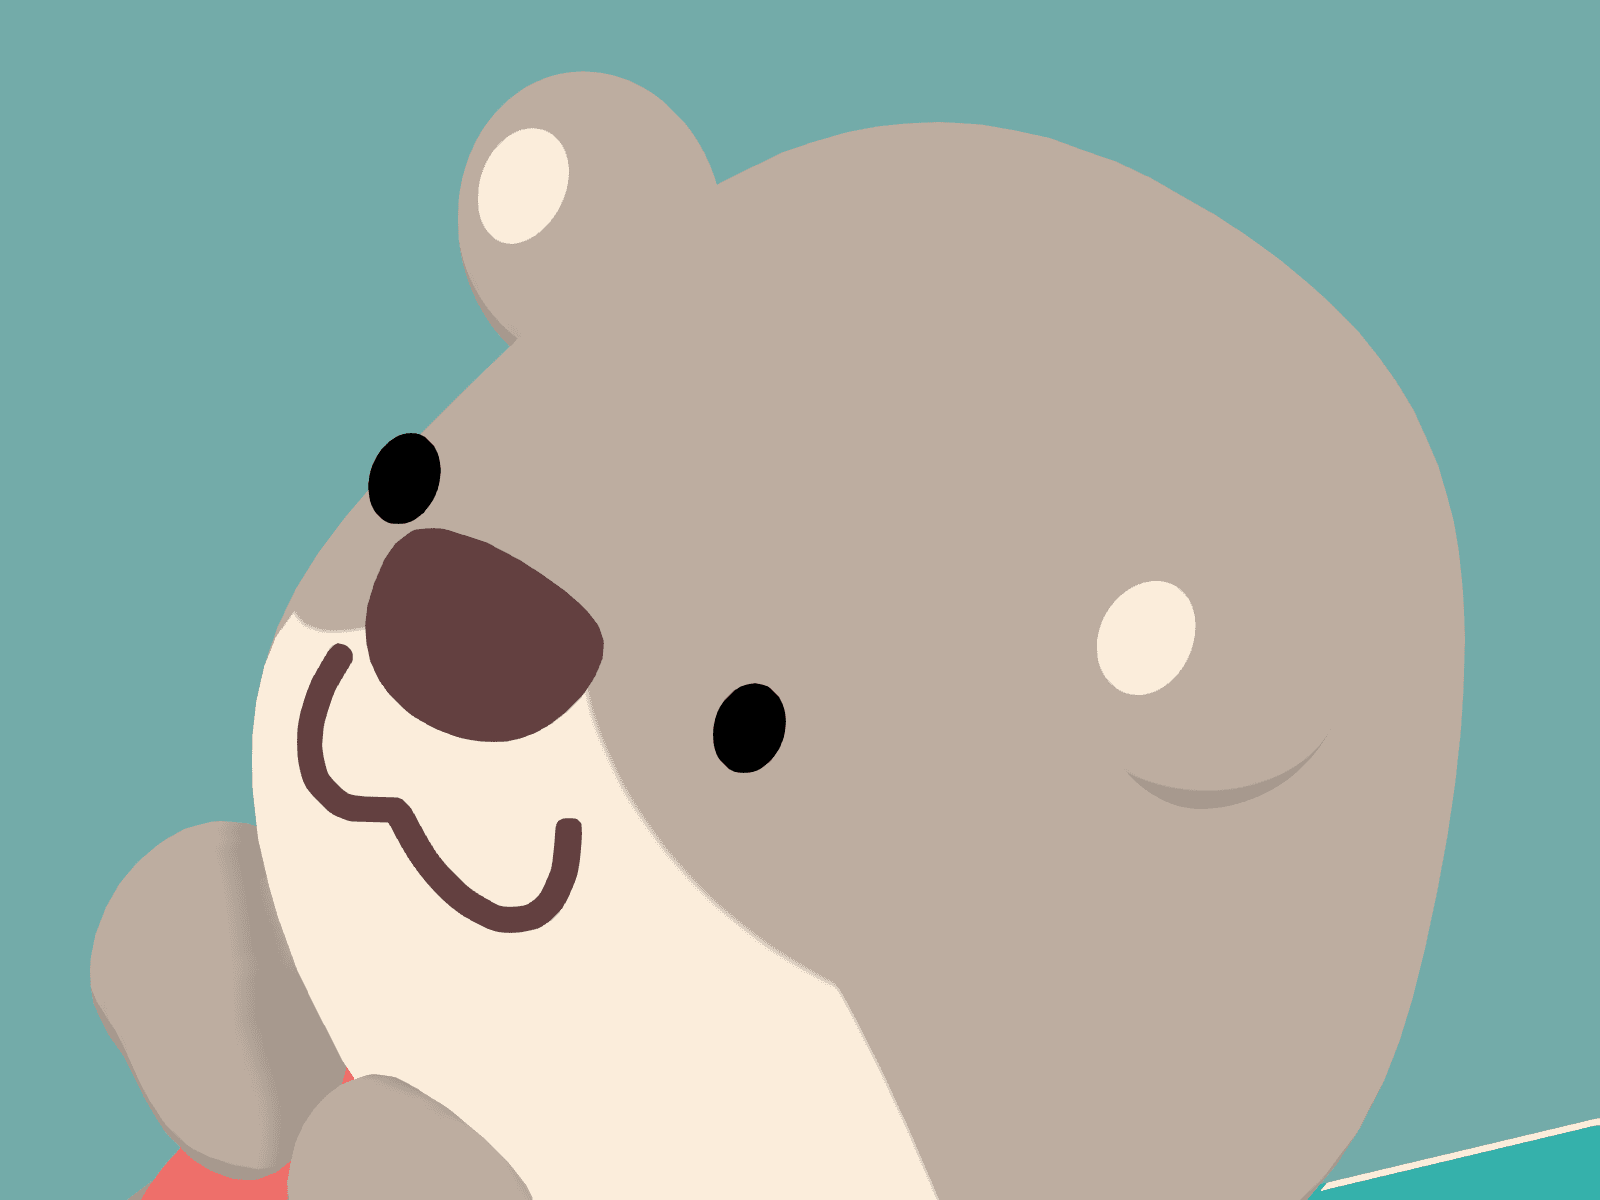 Otter's face in 3D, again